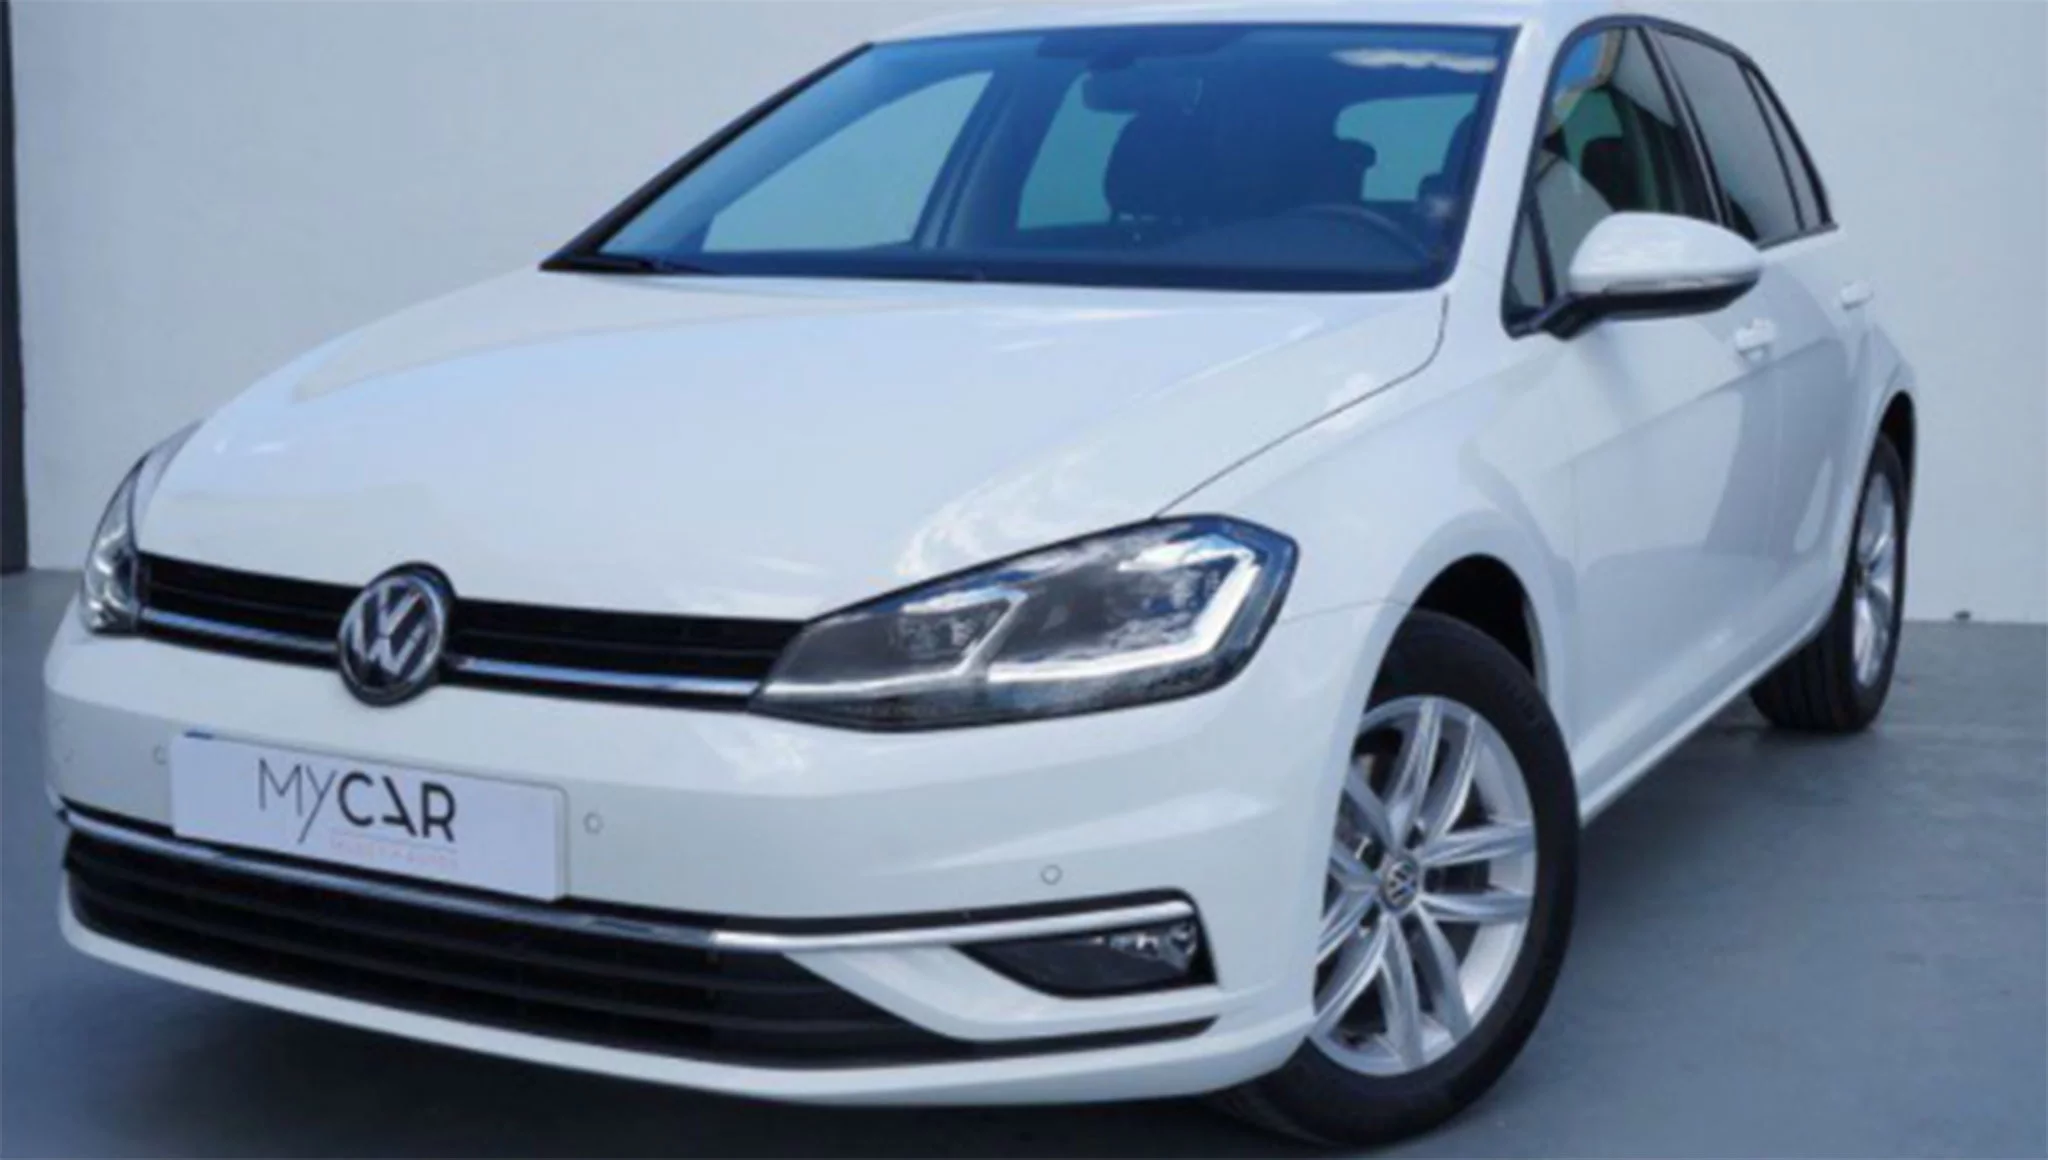 VOLKSWAGEN Golf 1.6TDI Business and Navi Ed. DSG7 85kW – MY CAR Select Autos